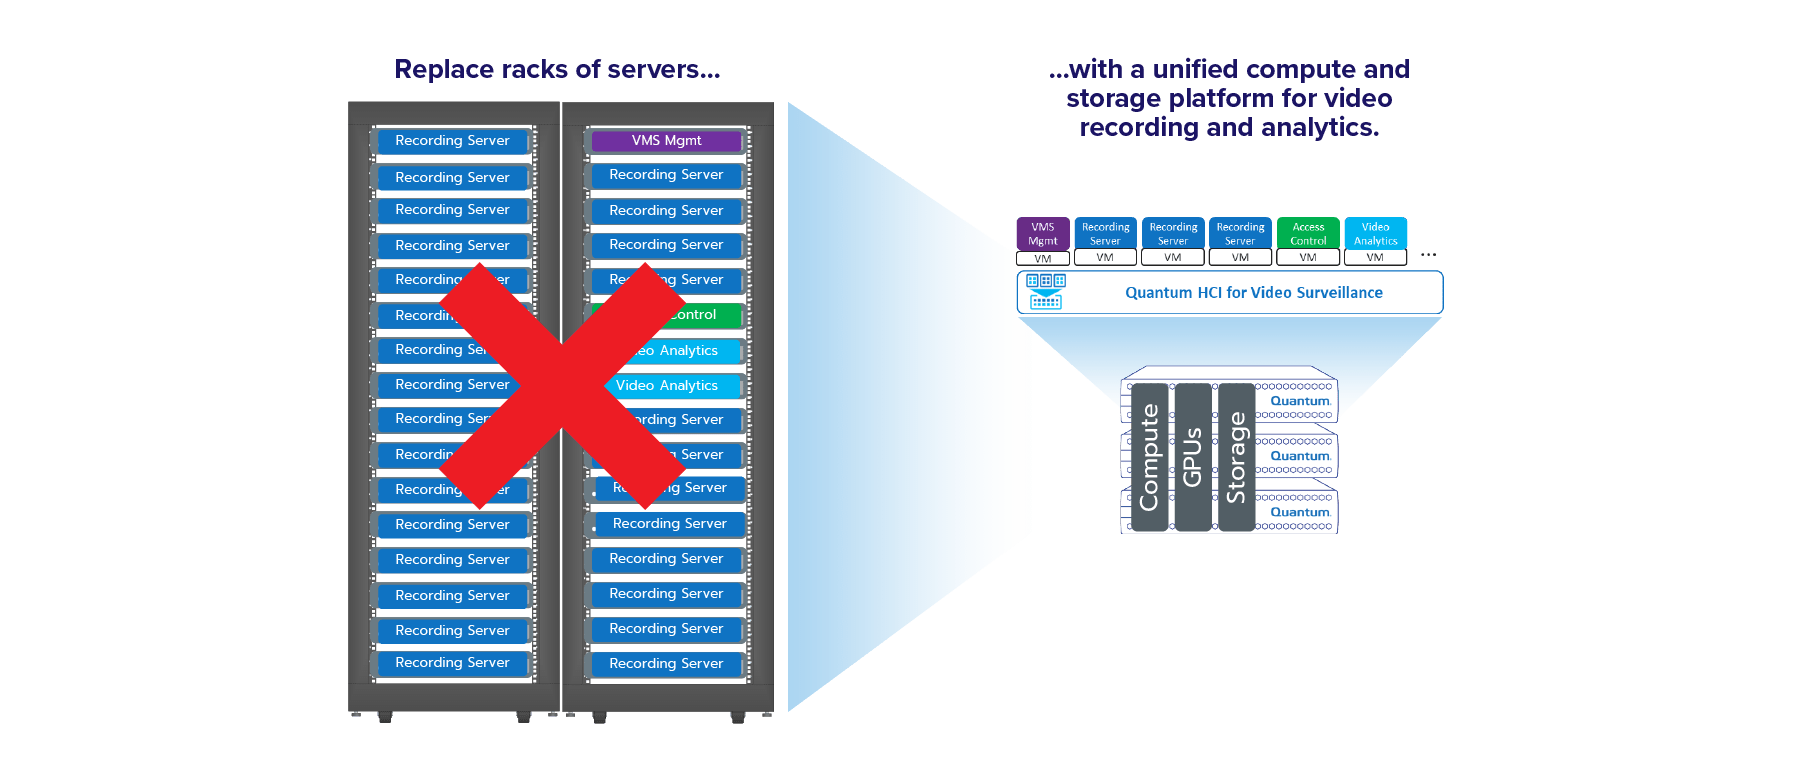 Replace racks of inefficient dedicated servers with a single hyper-converged platform